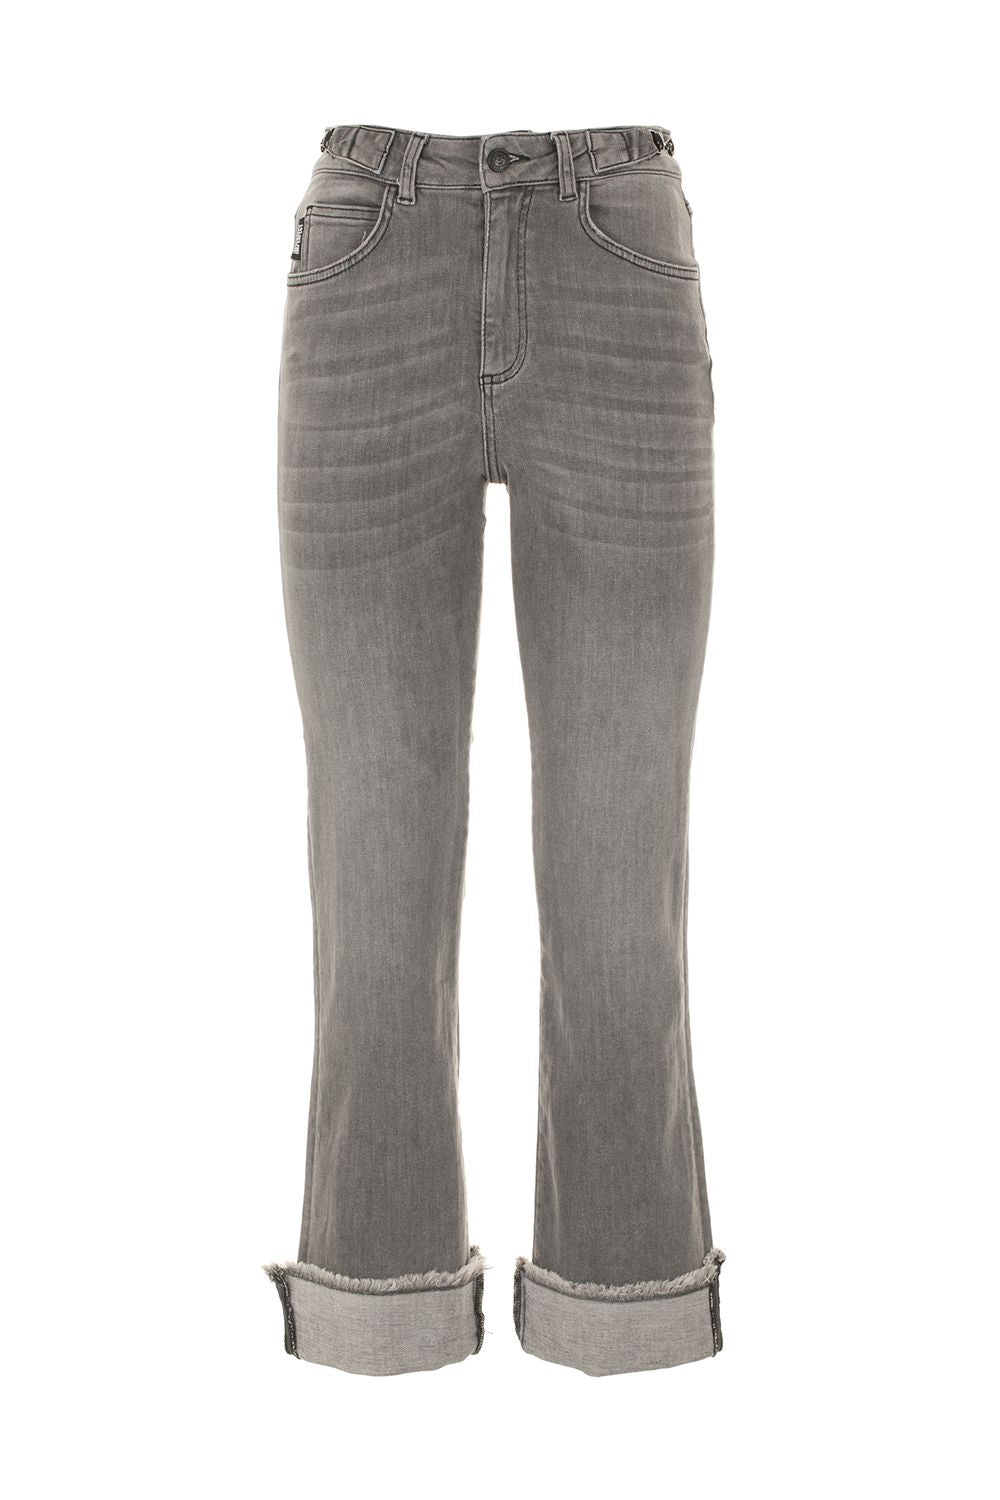 Light Grey Wash Imperfect Women's Flare Jeans